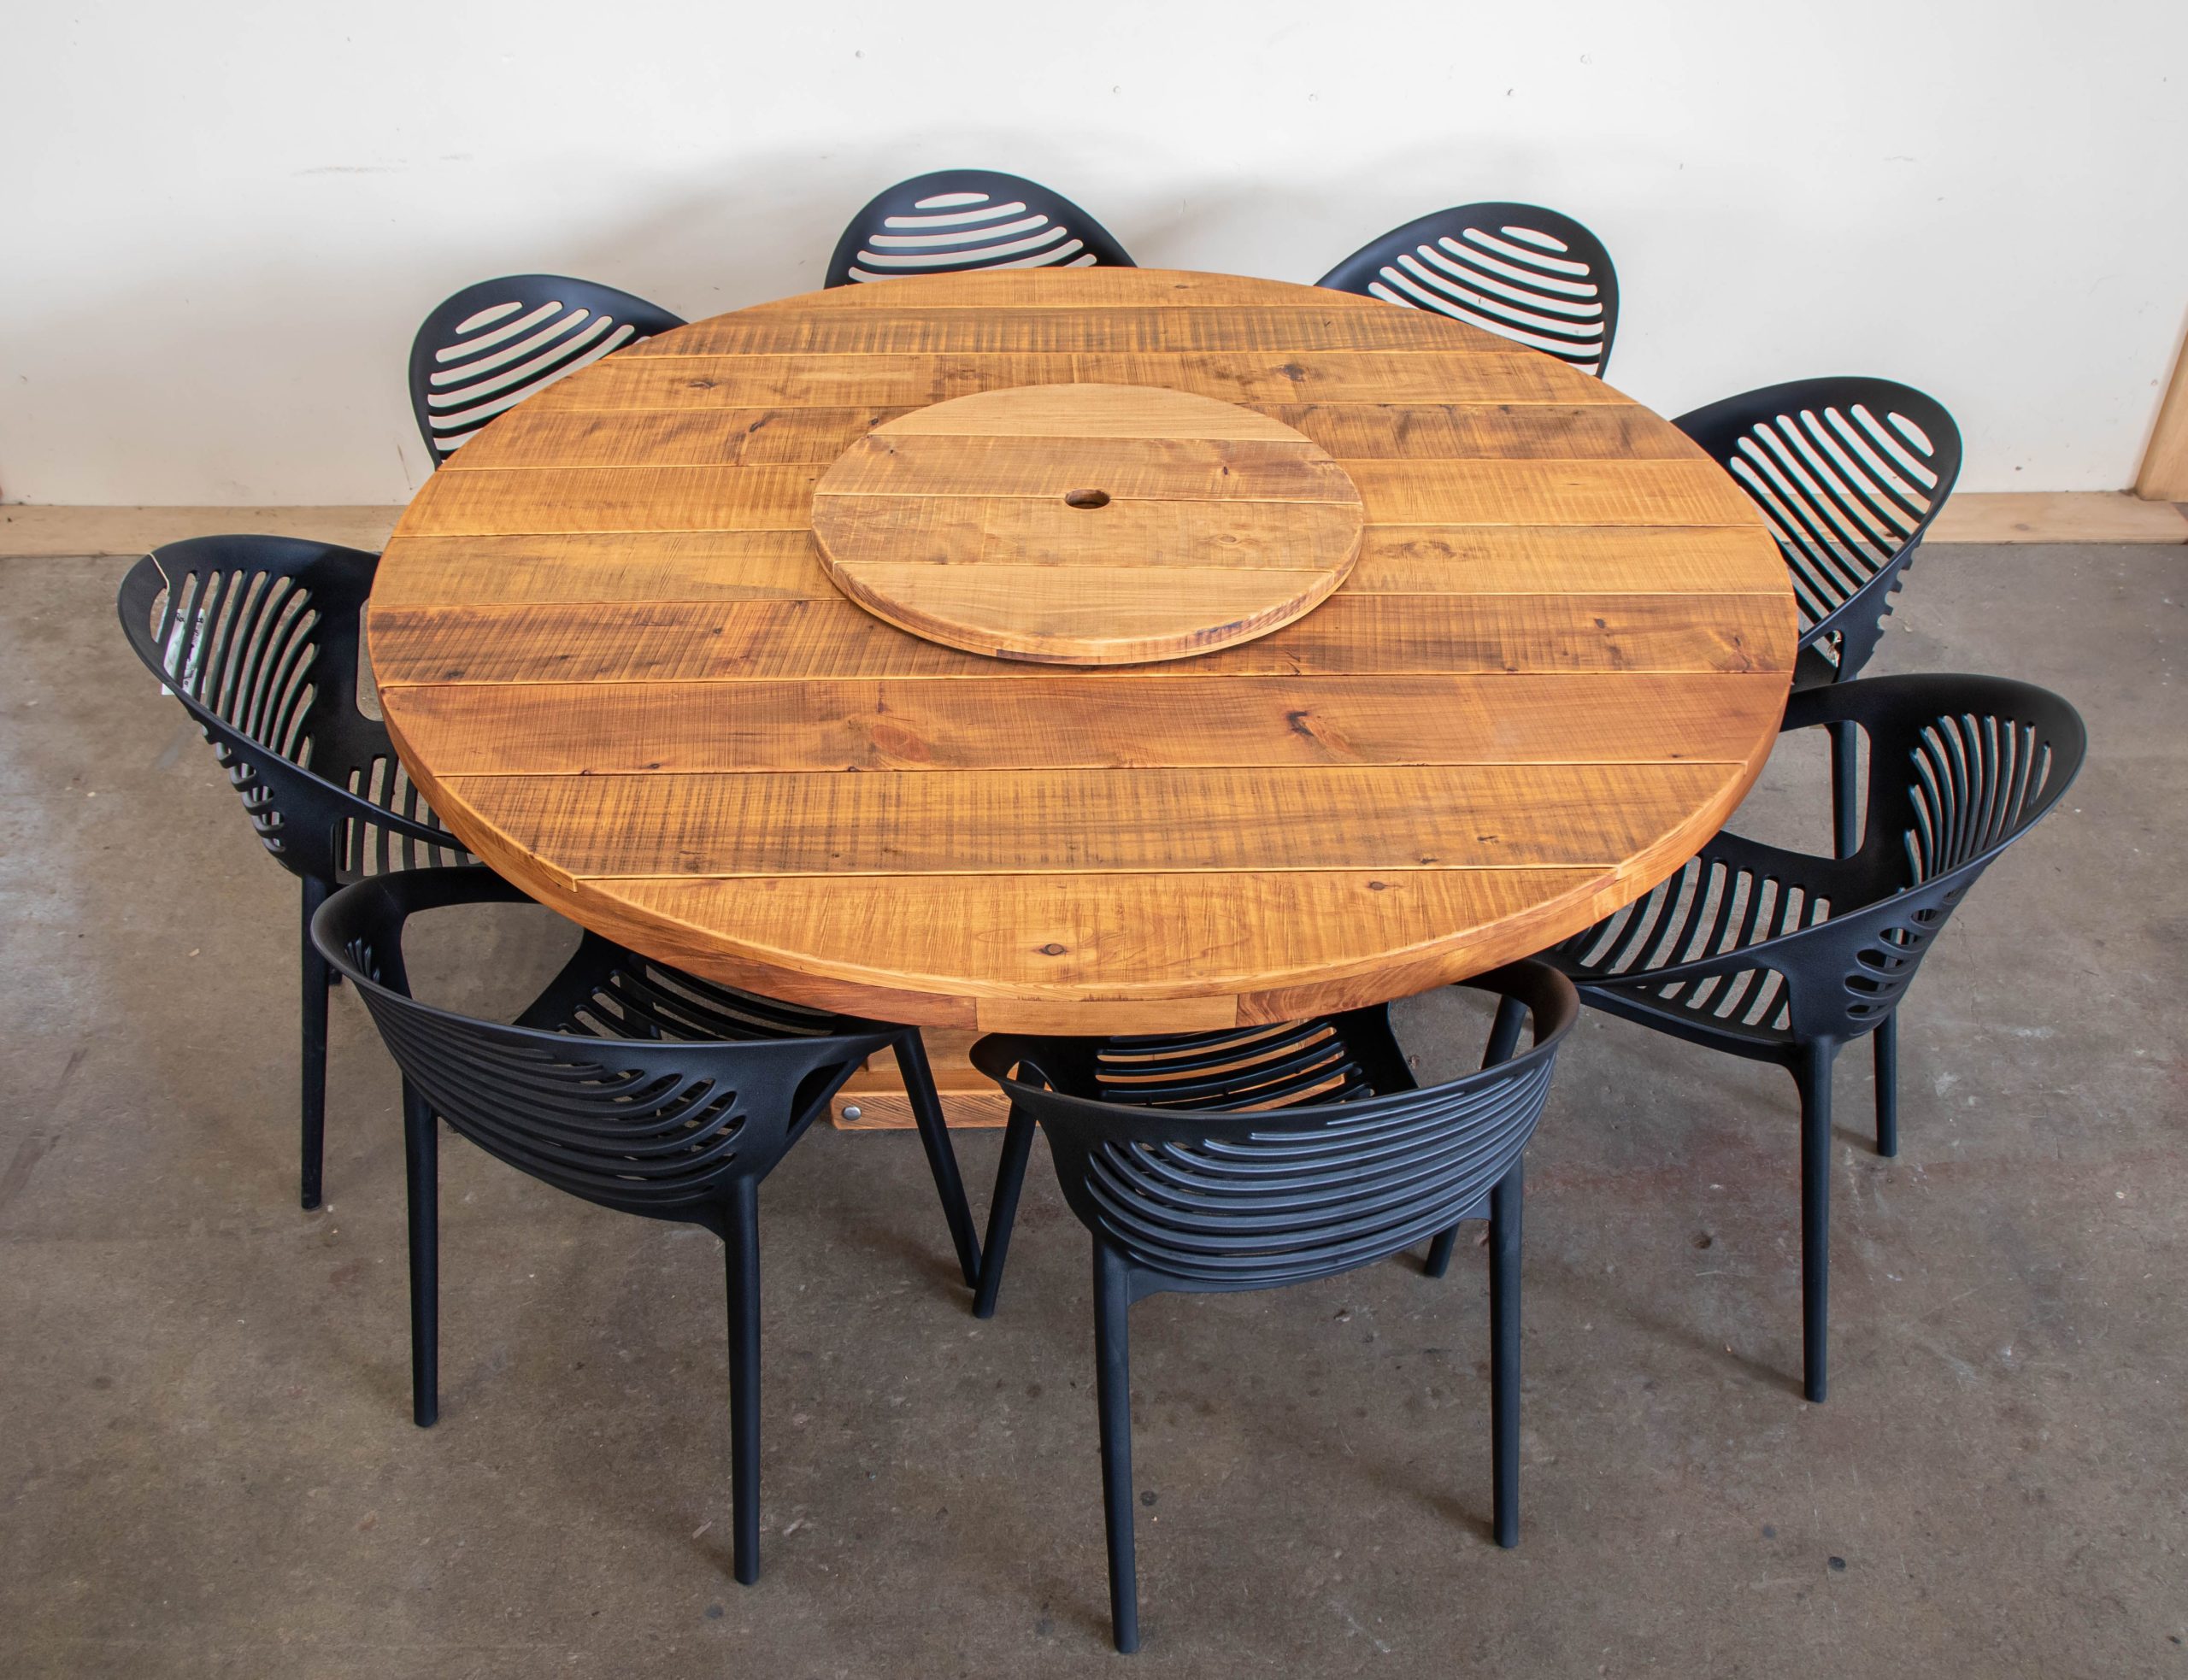 Woolpress Round Table Black Dog Furniture, How Big Are Round Tables That Seat 8m